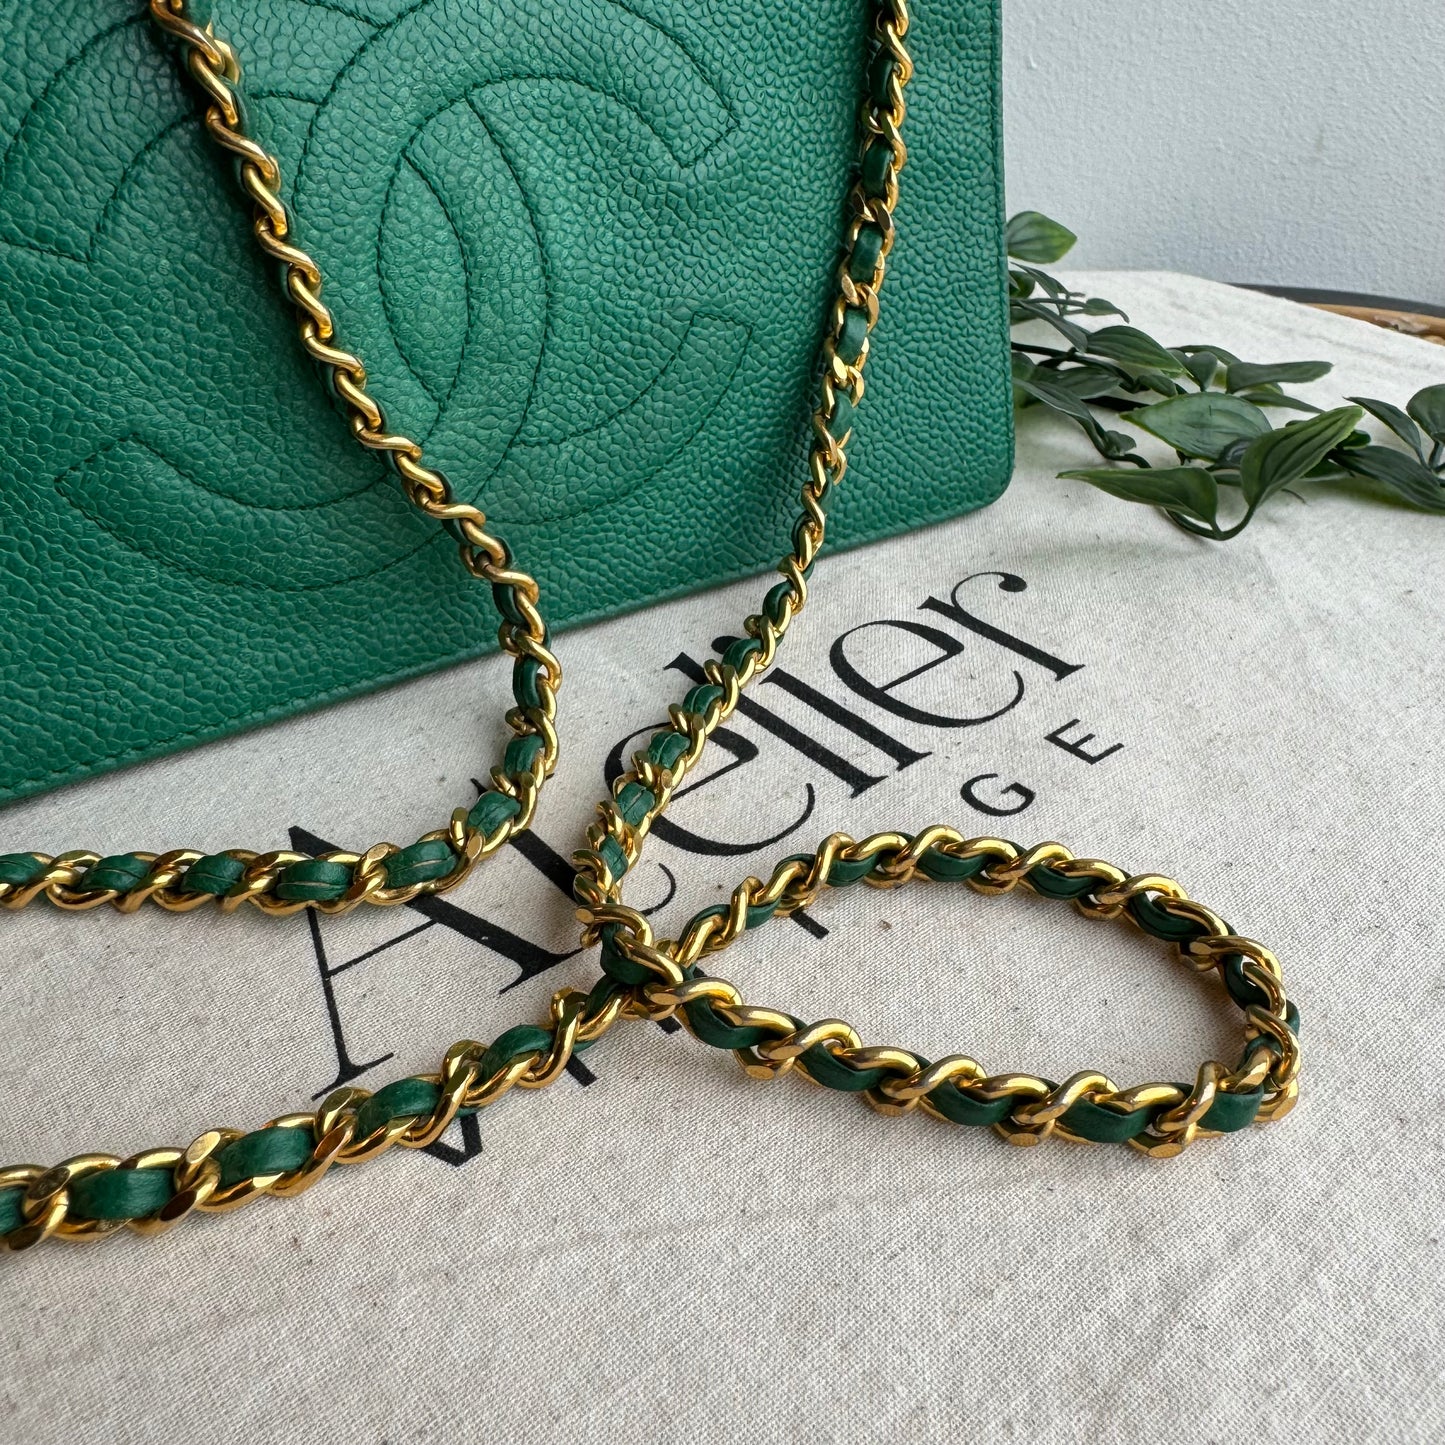 Chanel late 1980s Emerald Caviar Leather Wallet on Chain